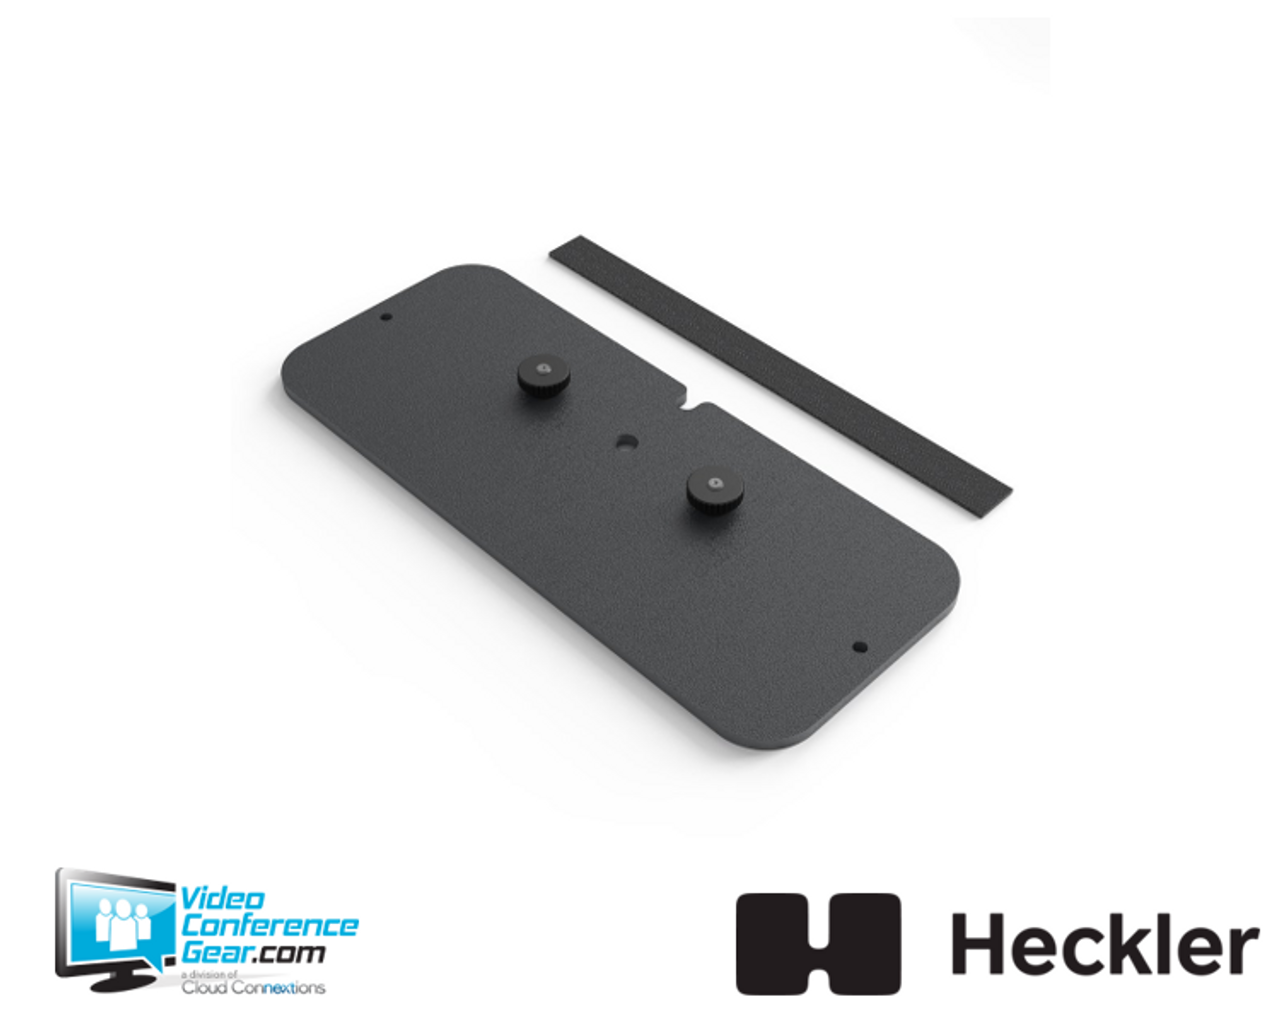 Heckler Design H615 Tripod Mount for Logitech MeetUp Designed for Distance Learning and the Hybrid Classroom